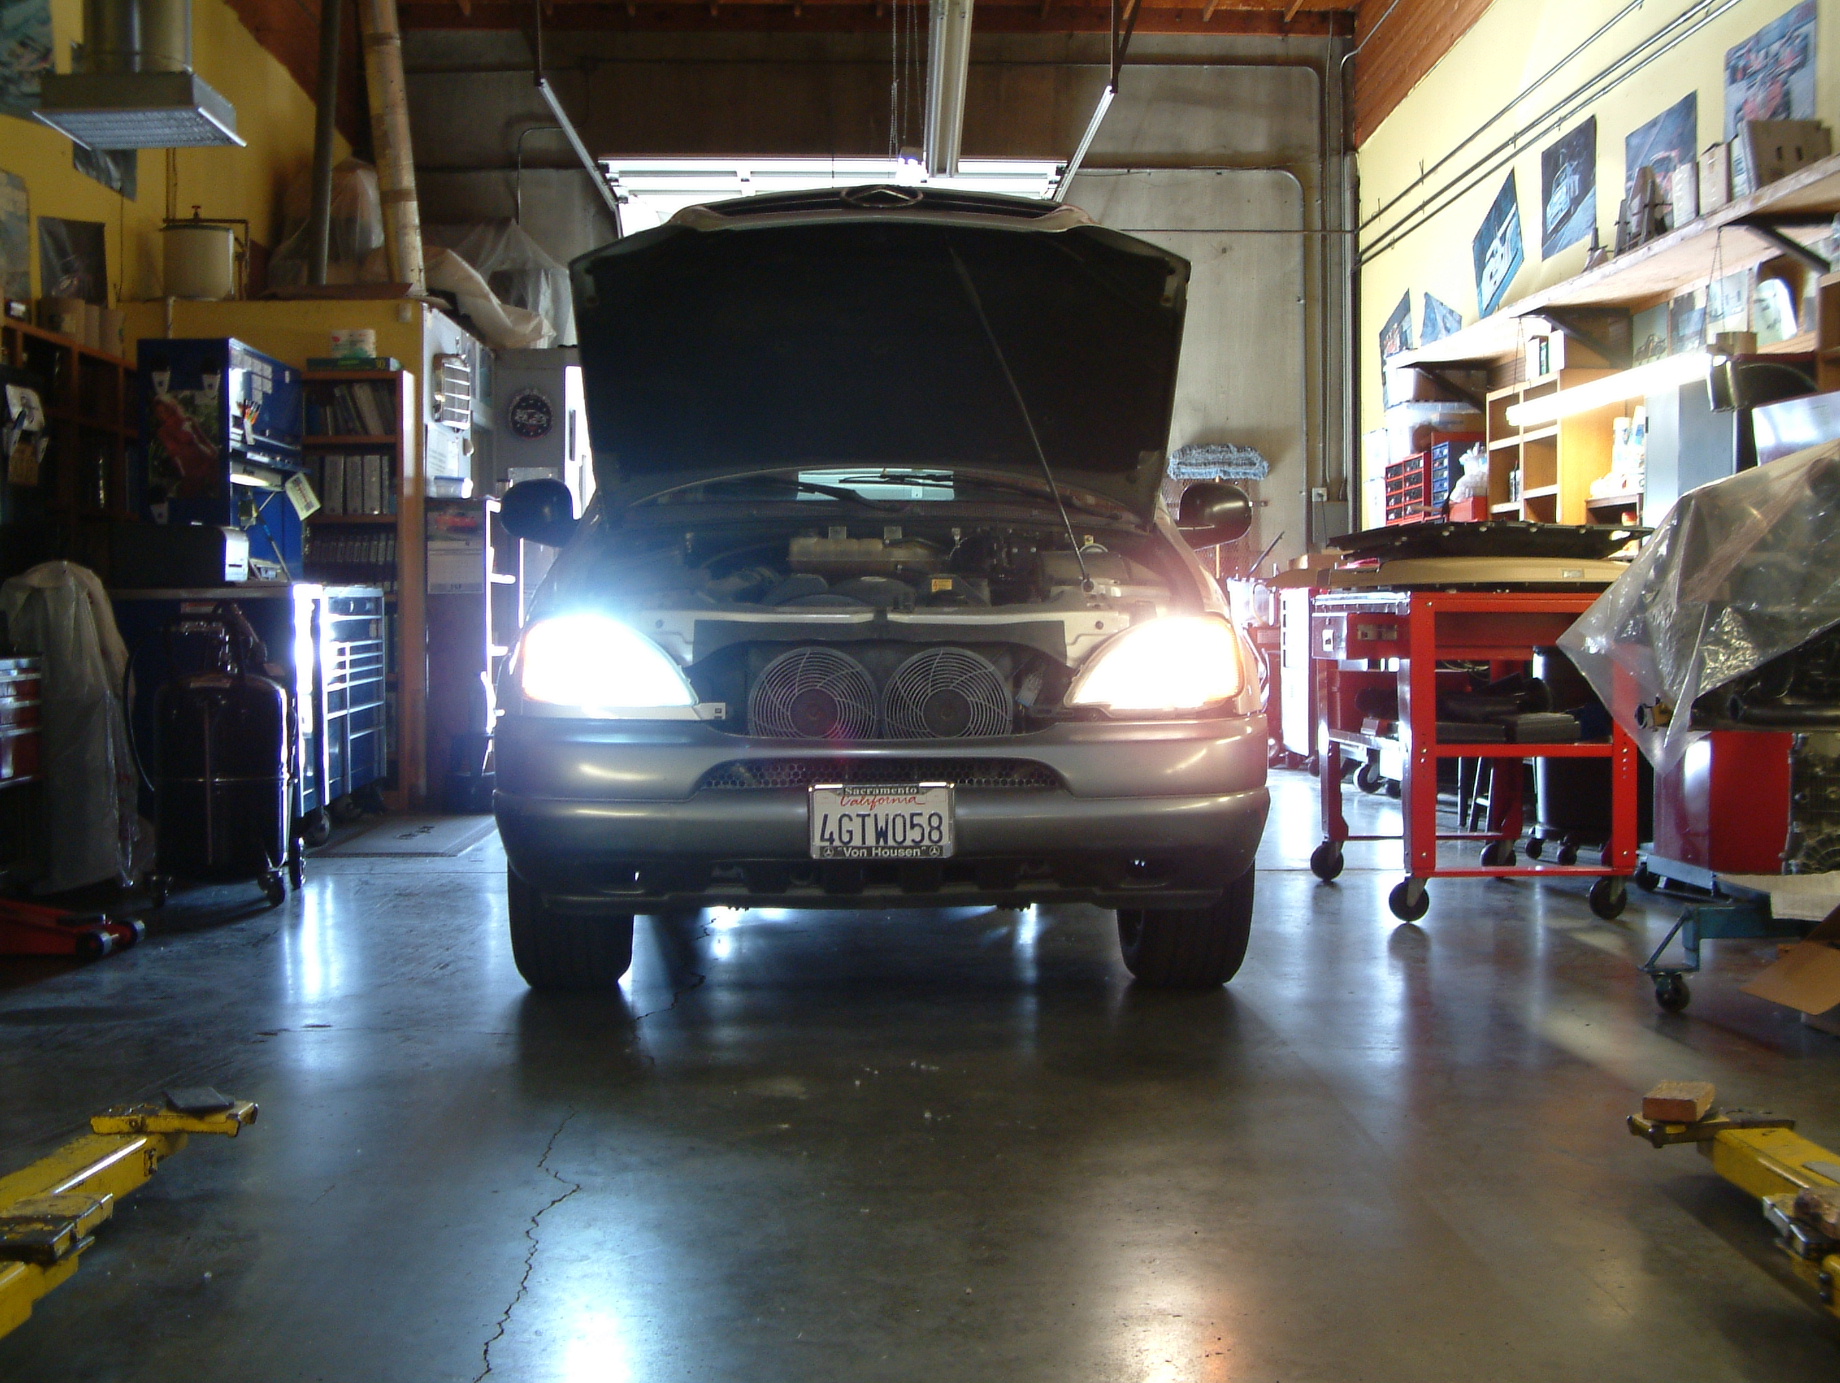 Mercedes H7/HID kit Installed on the left, compared to the H7 on the right.